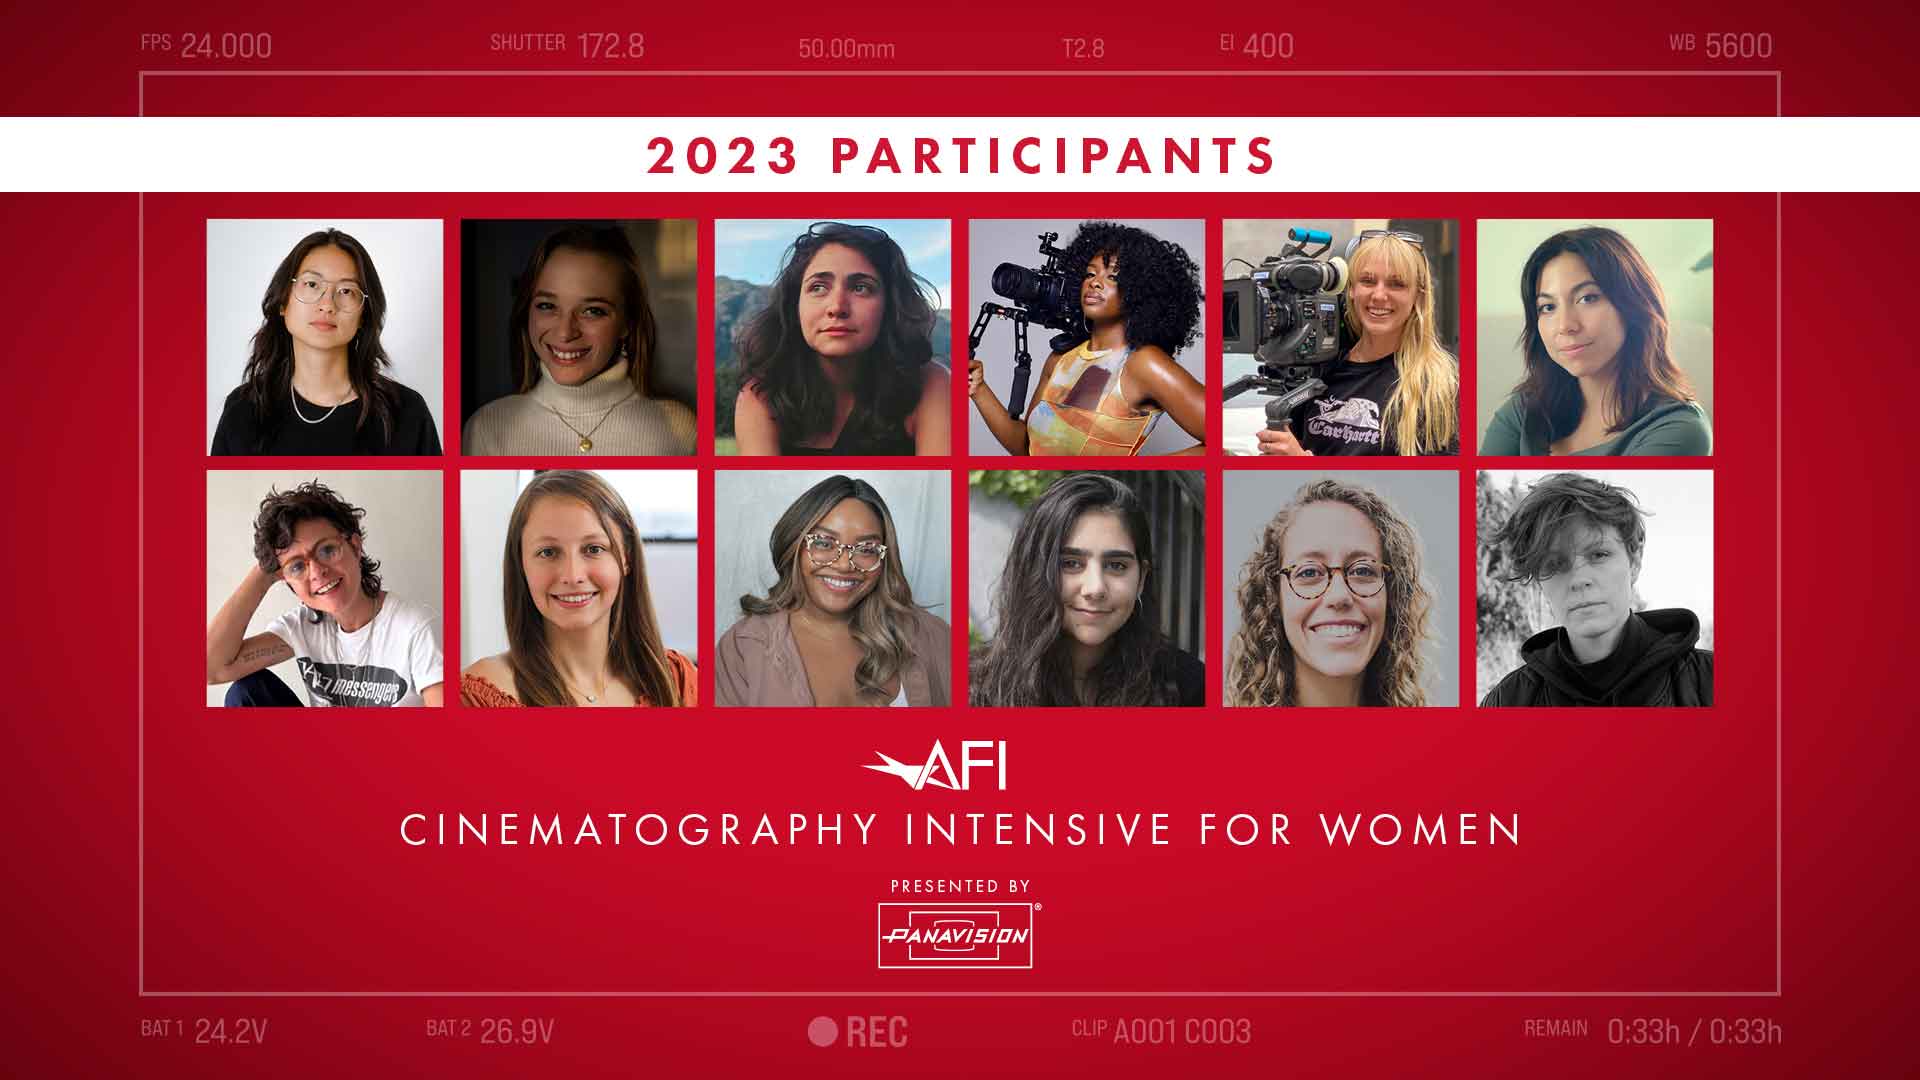 A collage image of 12 participants named to the 2023 edition of AFI's Cinematography Workshop for Women